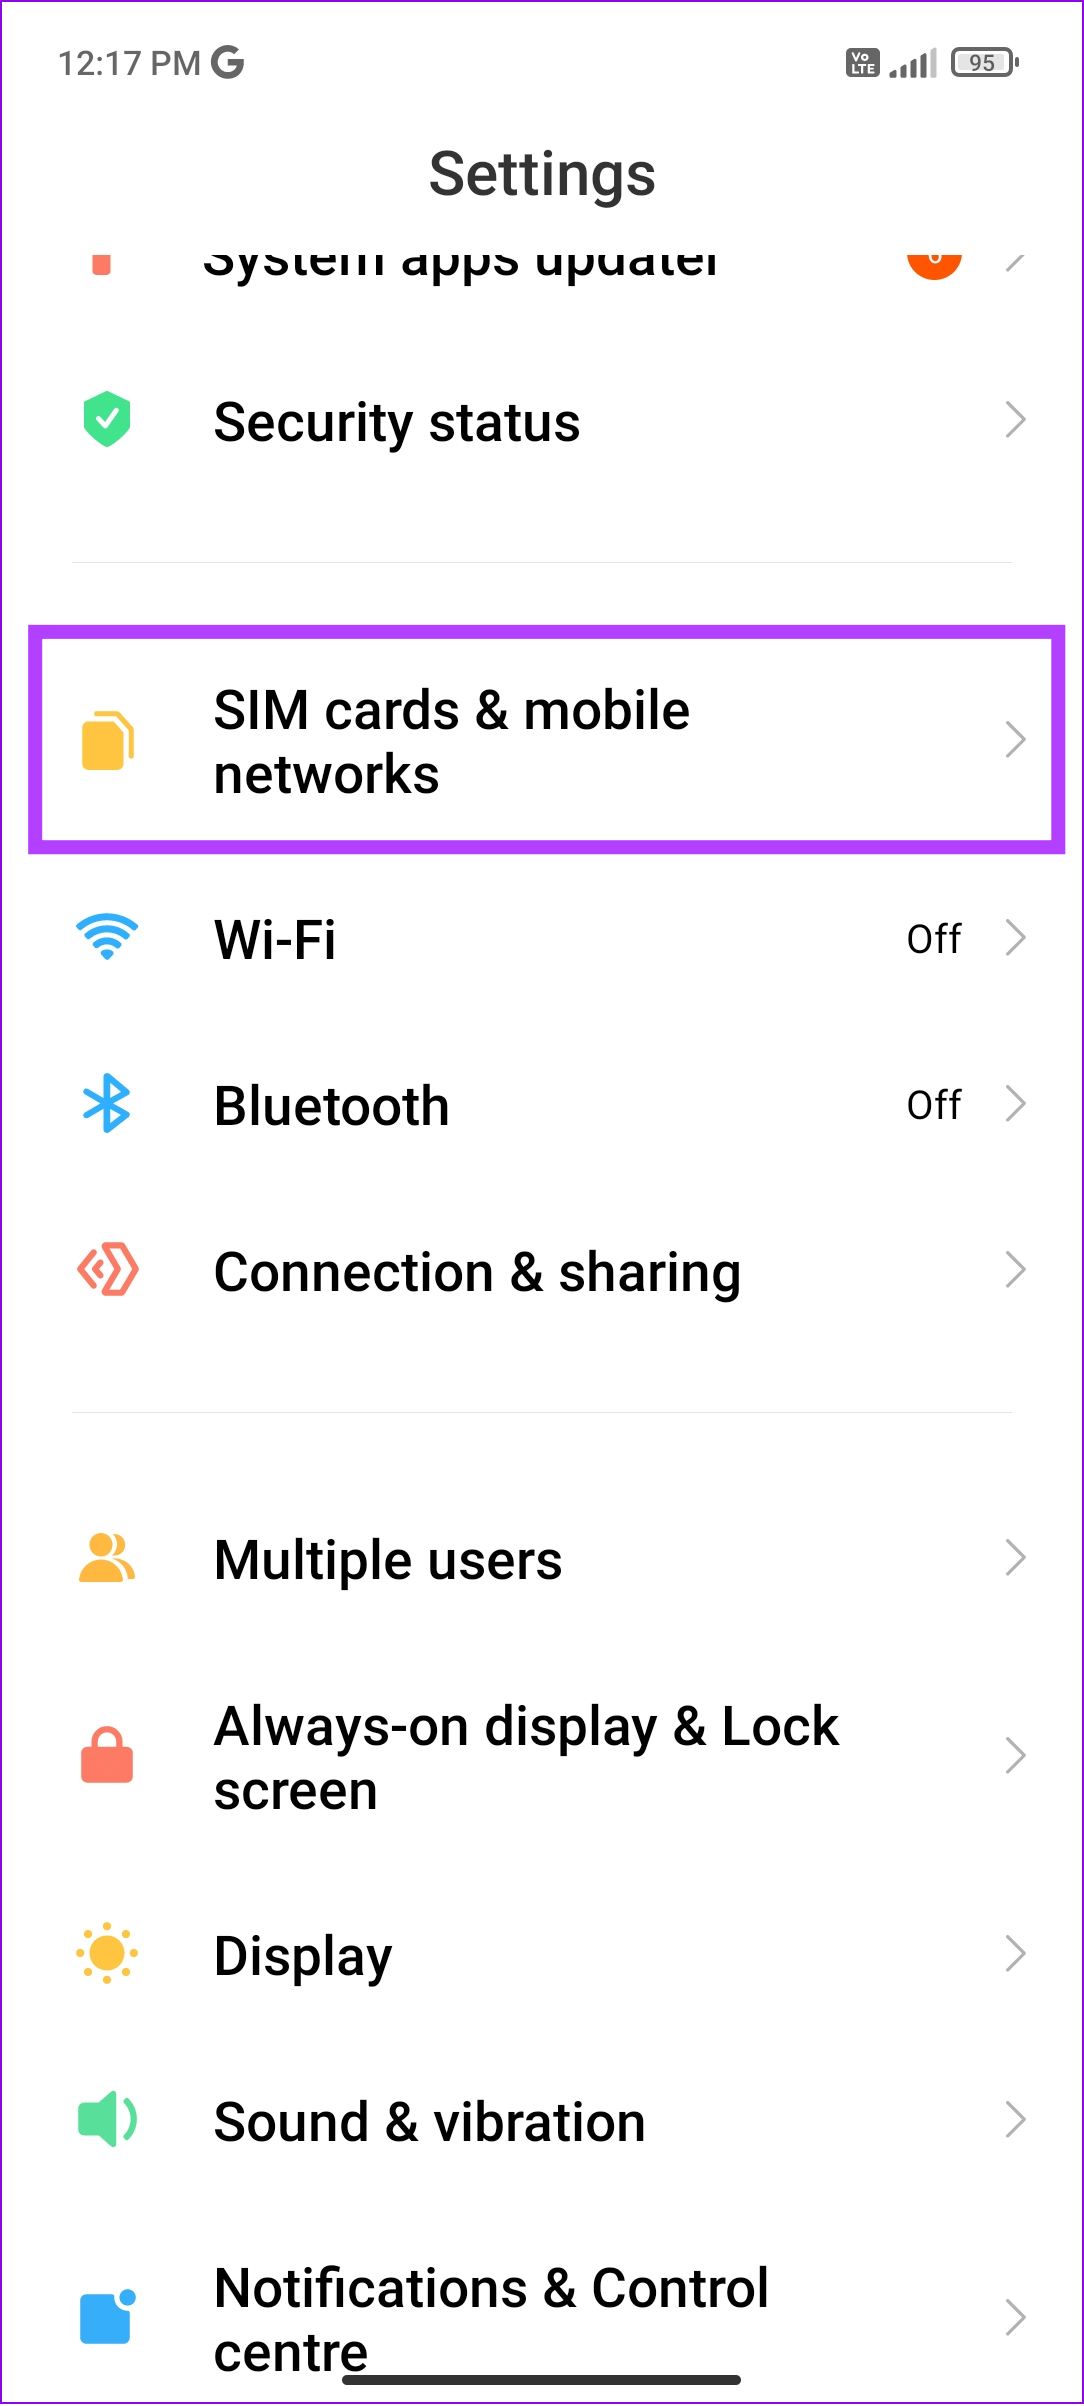 tap SIM cards and mobile networks